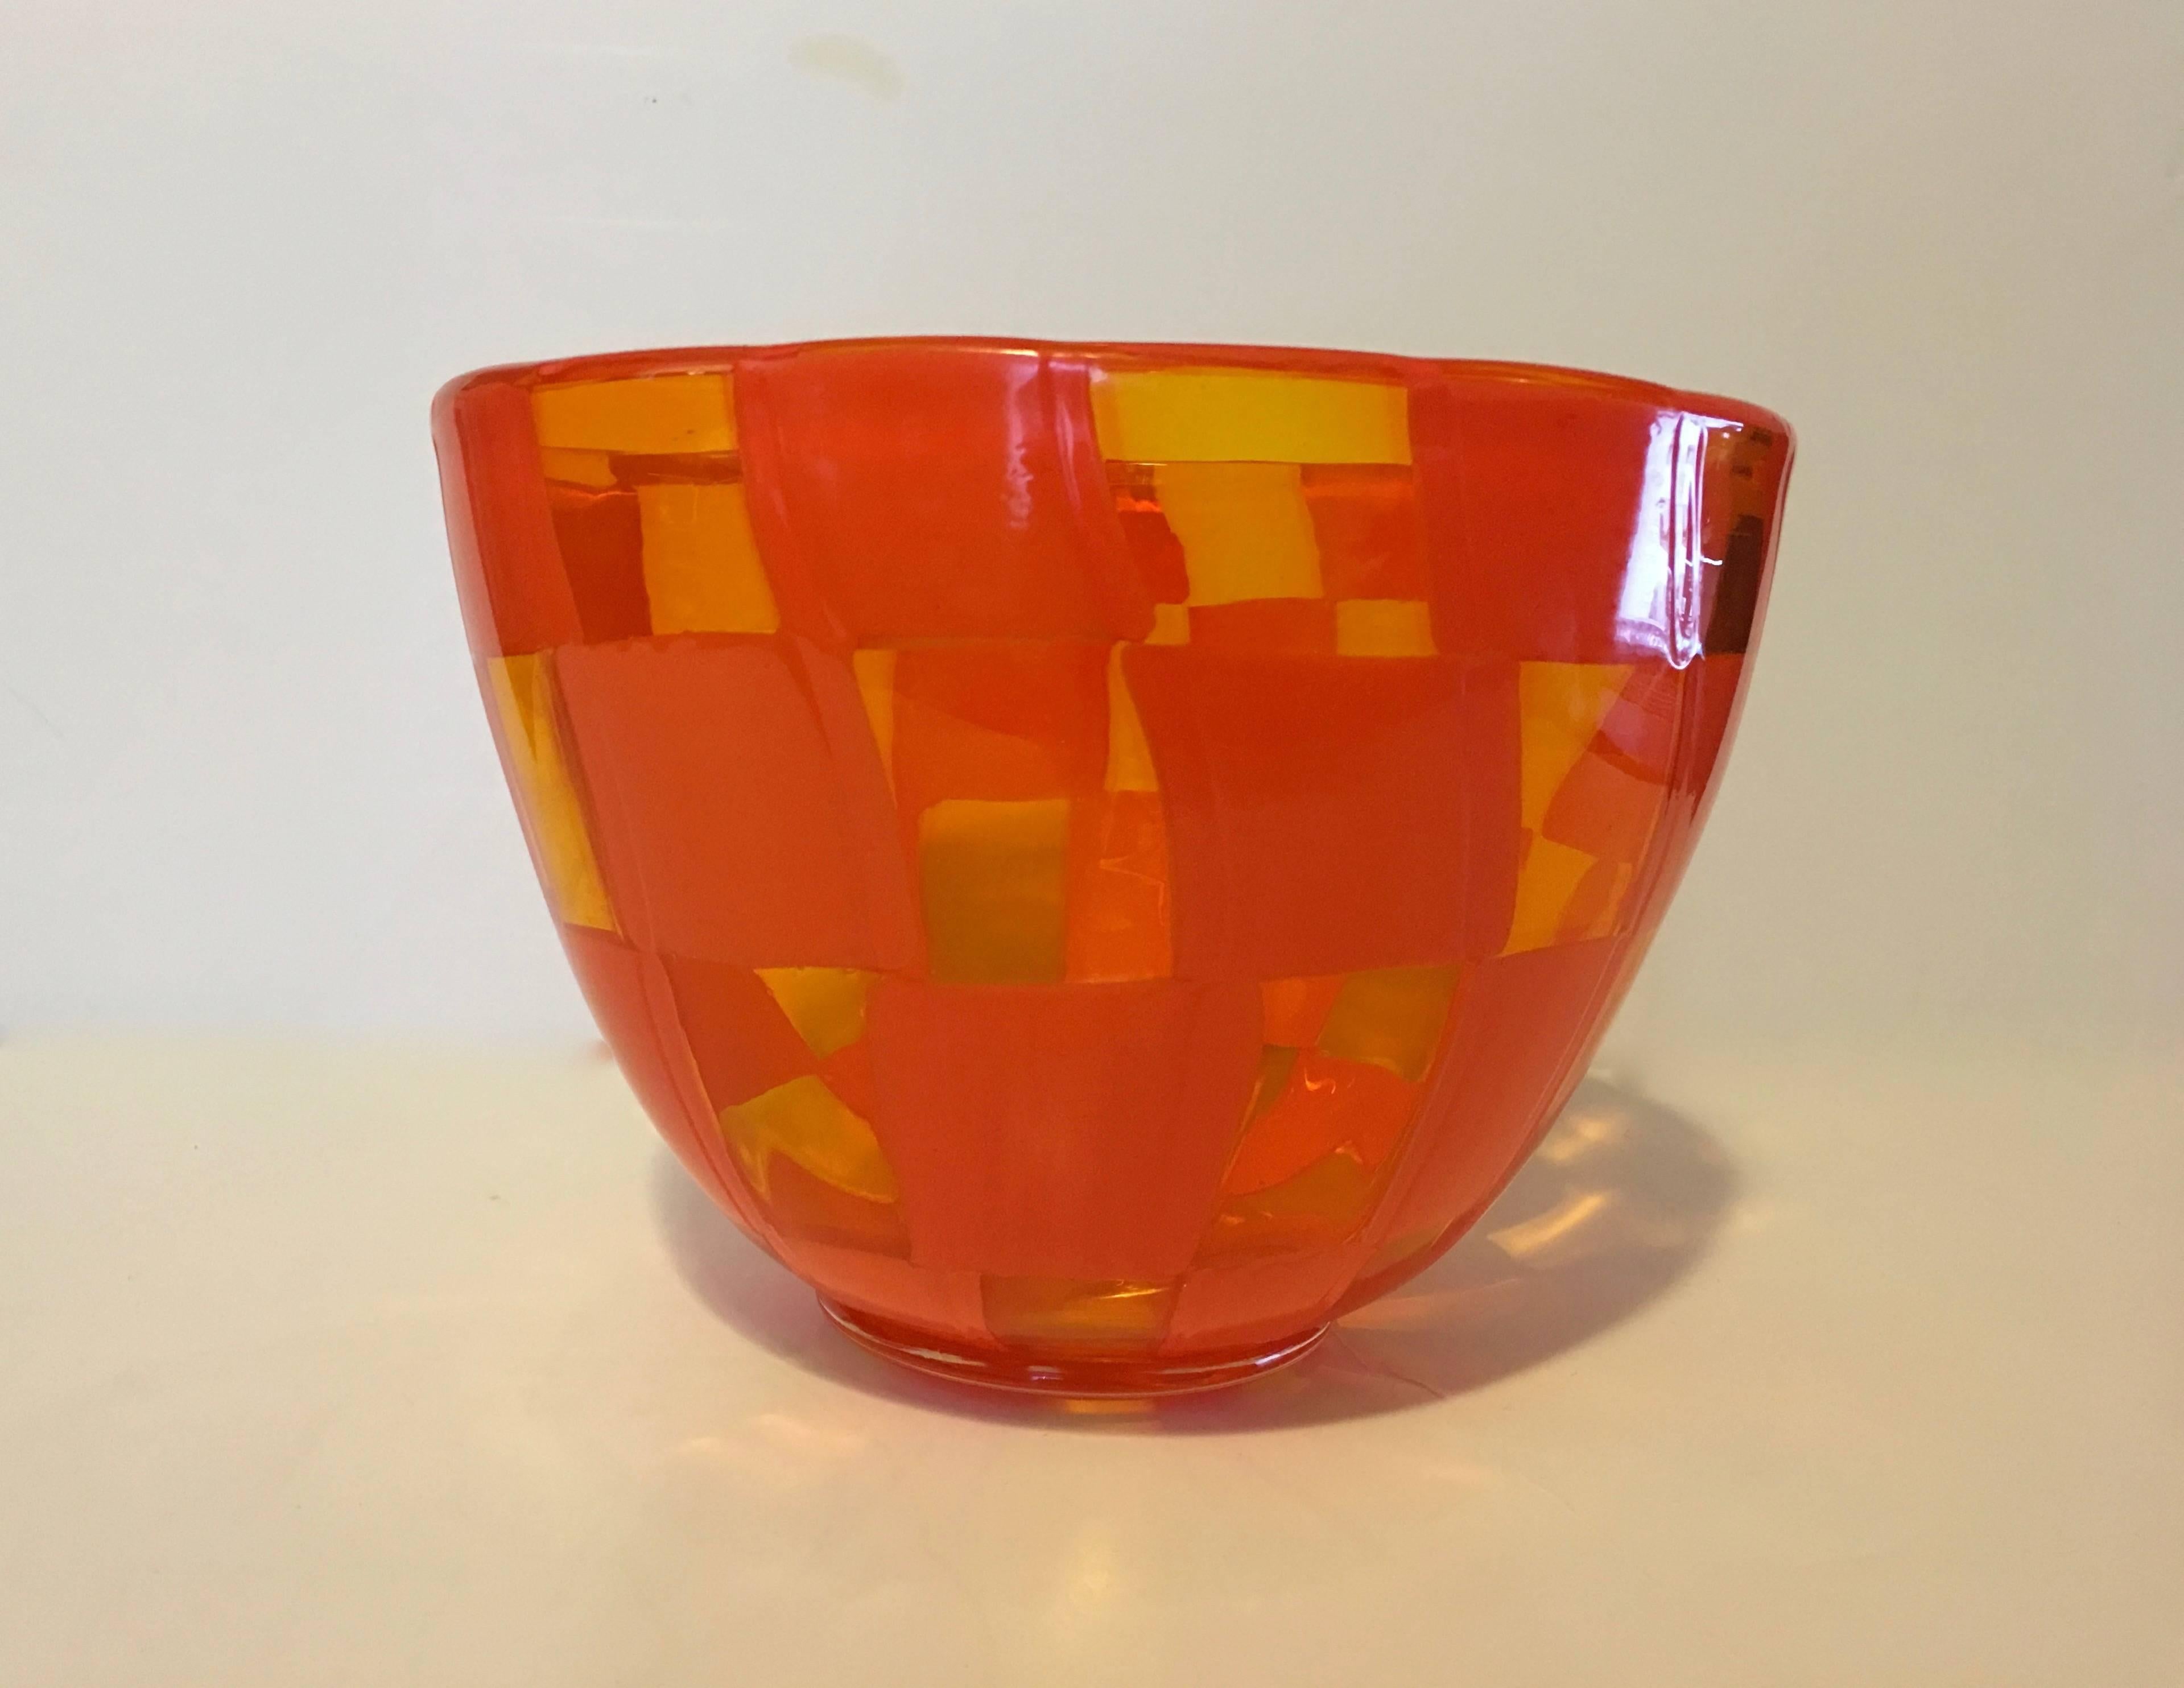 Barovier and Toso.
Oval bowl.
Amber glass with orange patchwork.
Measures: Approx 6.25 inches high x 8.25 inches x 7.25 inches.
Signed underneath Barovier and Toso, Murano.
Excellent condition.
 